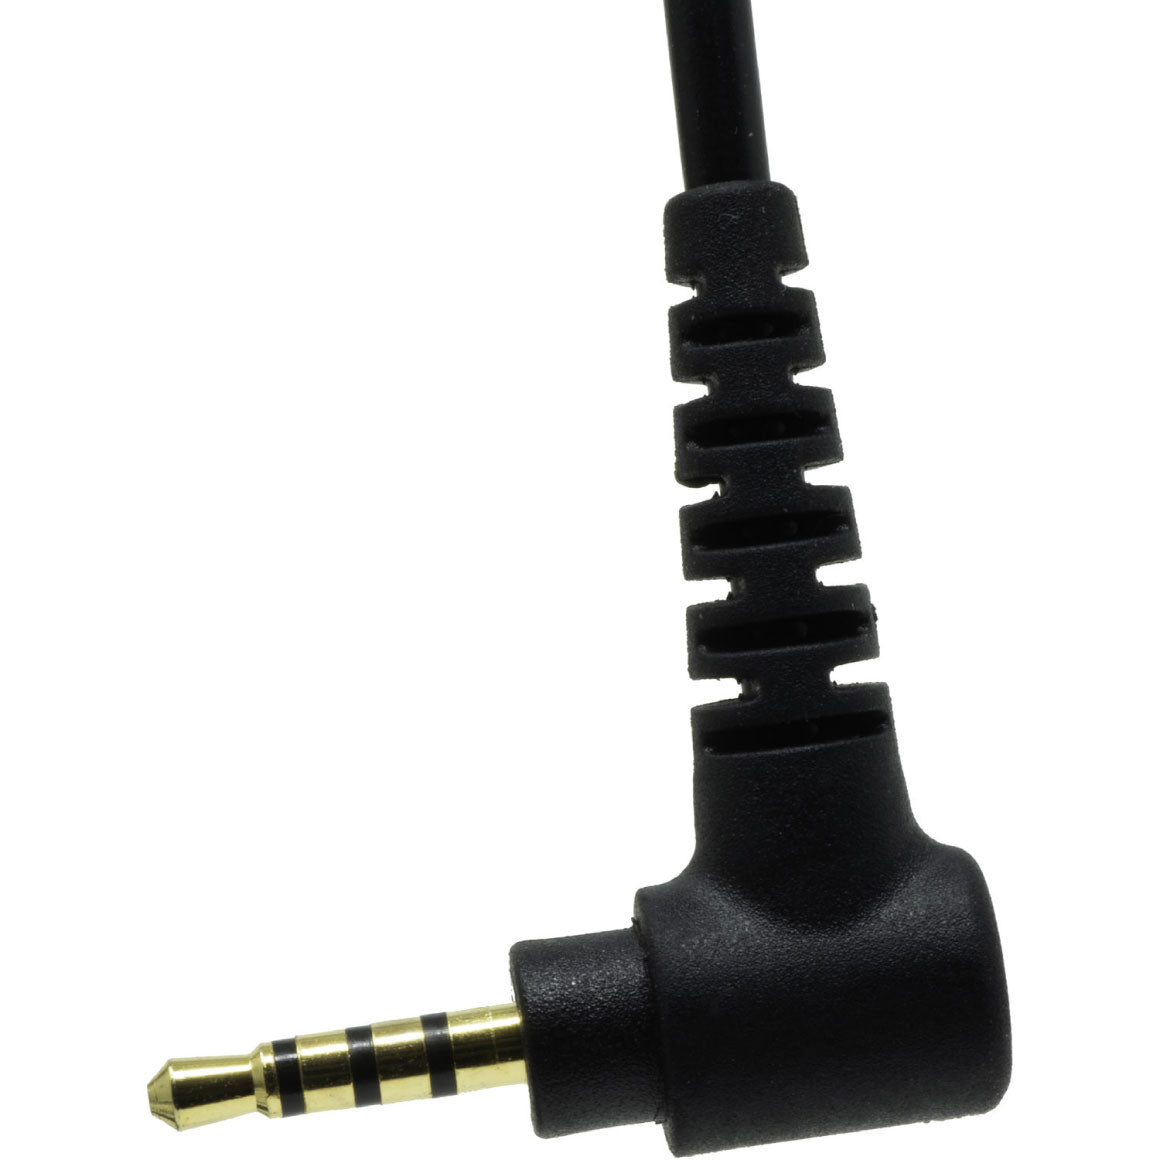 Heaphone-Zone-Etymotic-ER4 SR/XR Balanced 2.5mm Replacement Cable